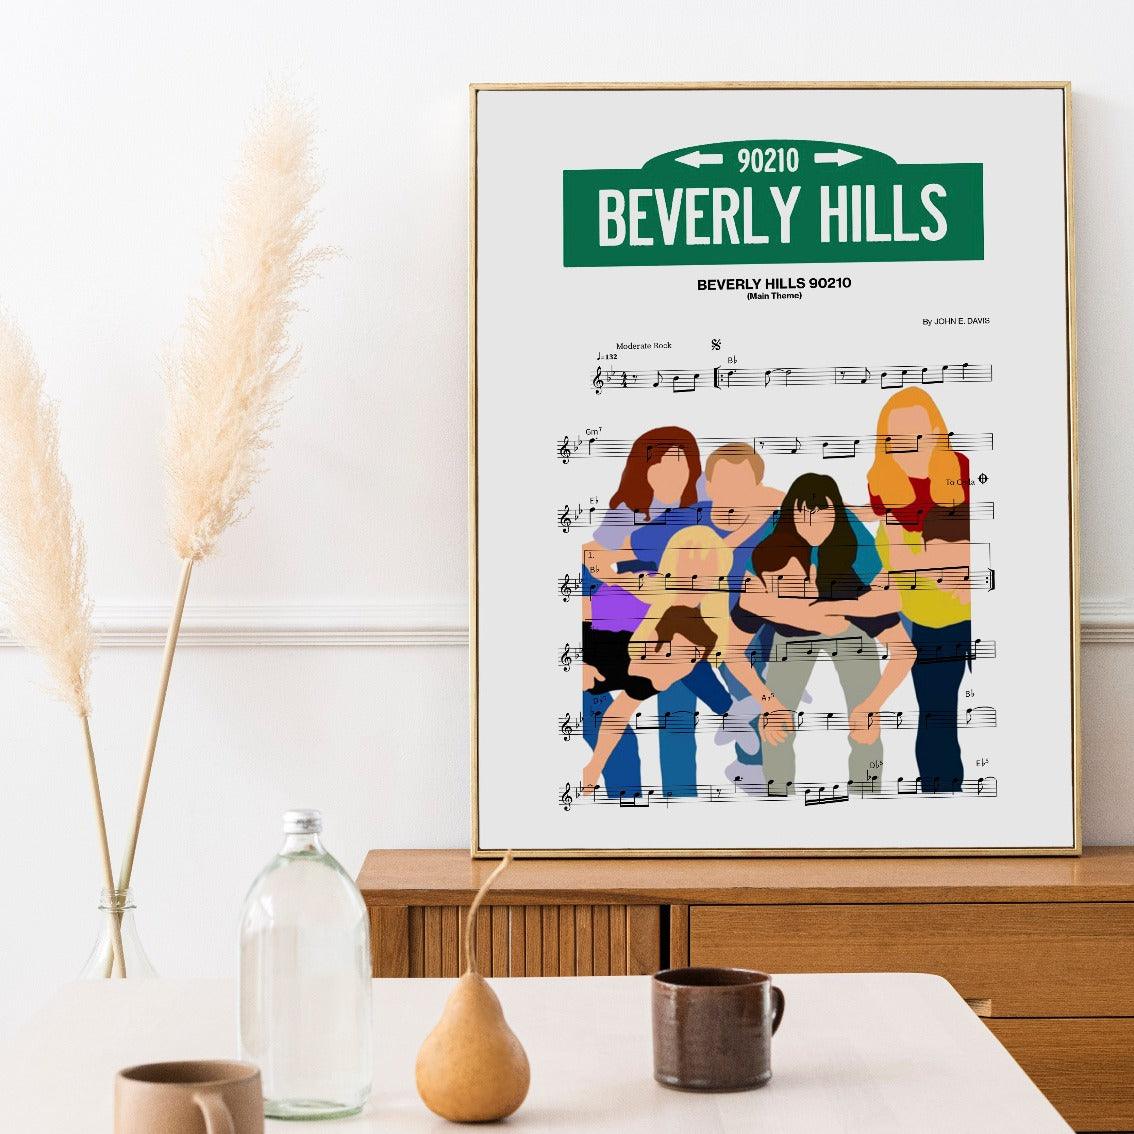 Give your walls some personality with this one-of-a-kind BEVERLY HILLS 90210 Main Theme Poster. Printed on high-quality paper, this poster features the lyrics to the show's main theme song. Perfect for any fan of the show, this poster is a great way to show your love for BEVERLY HILLS 90210.